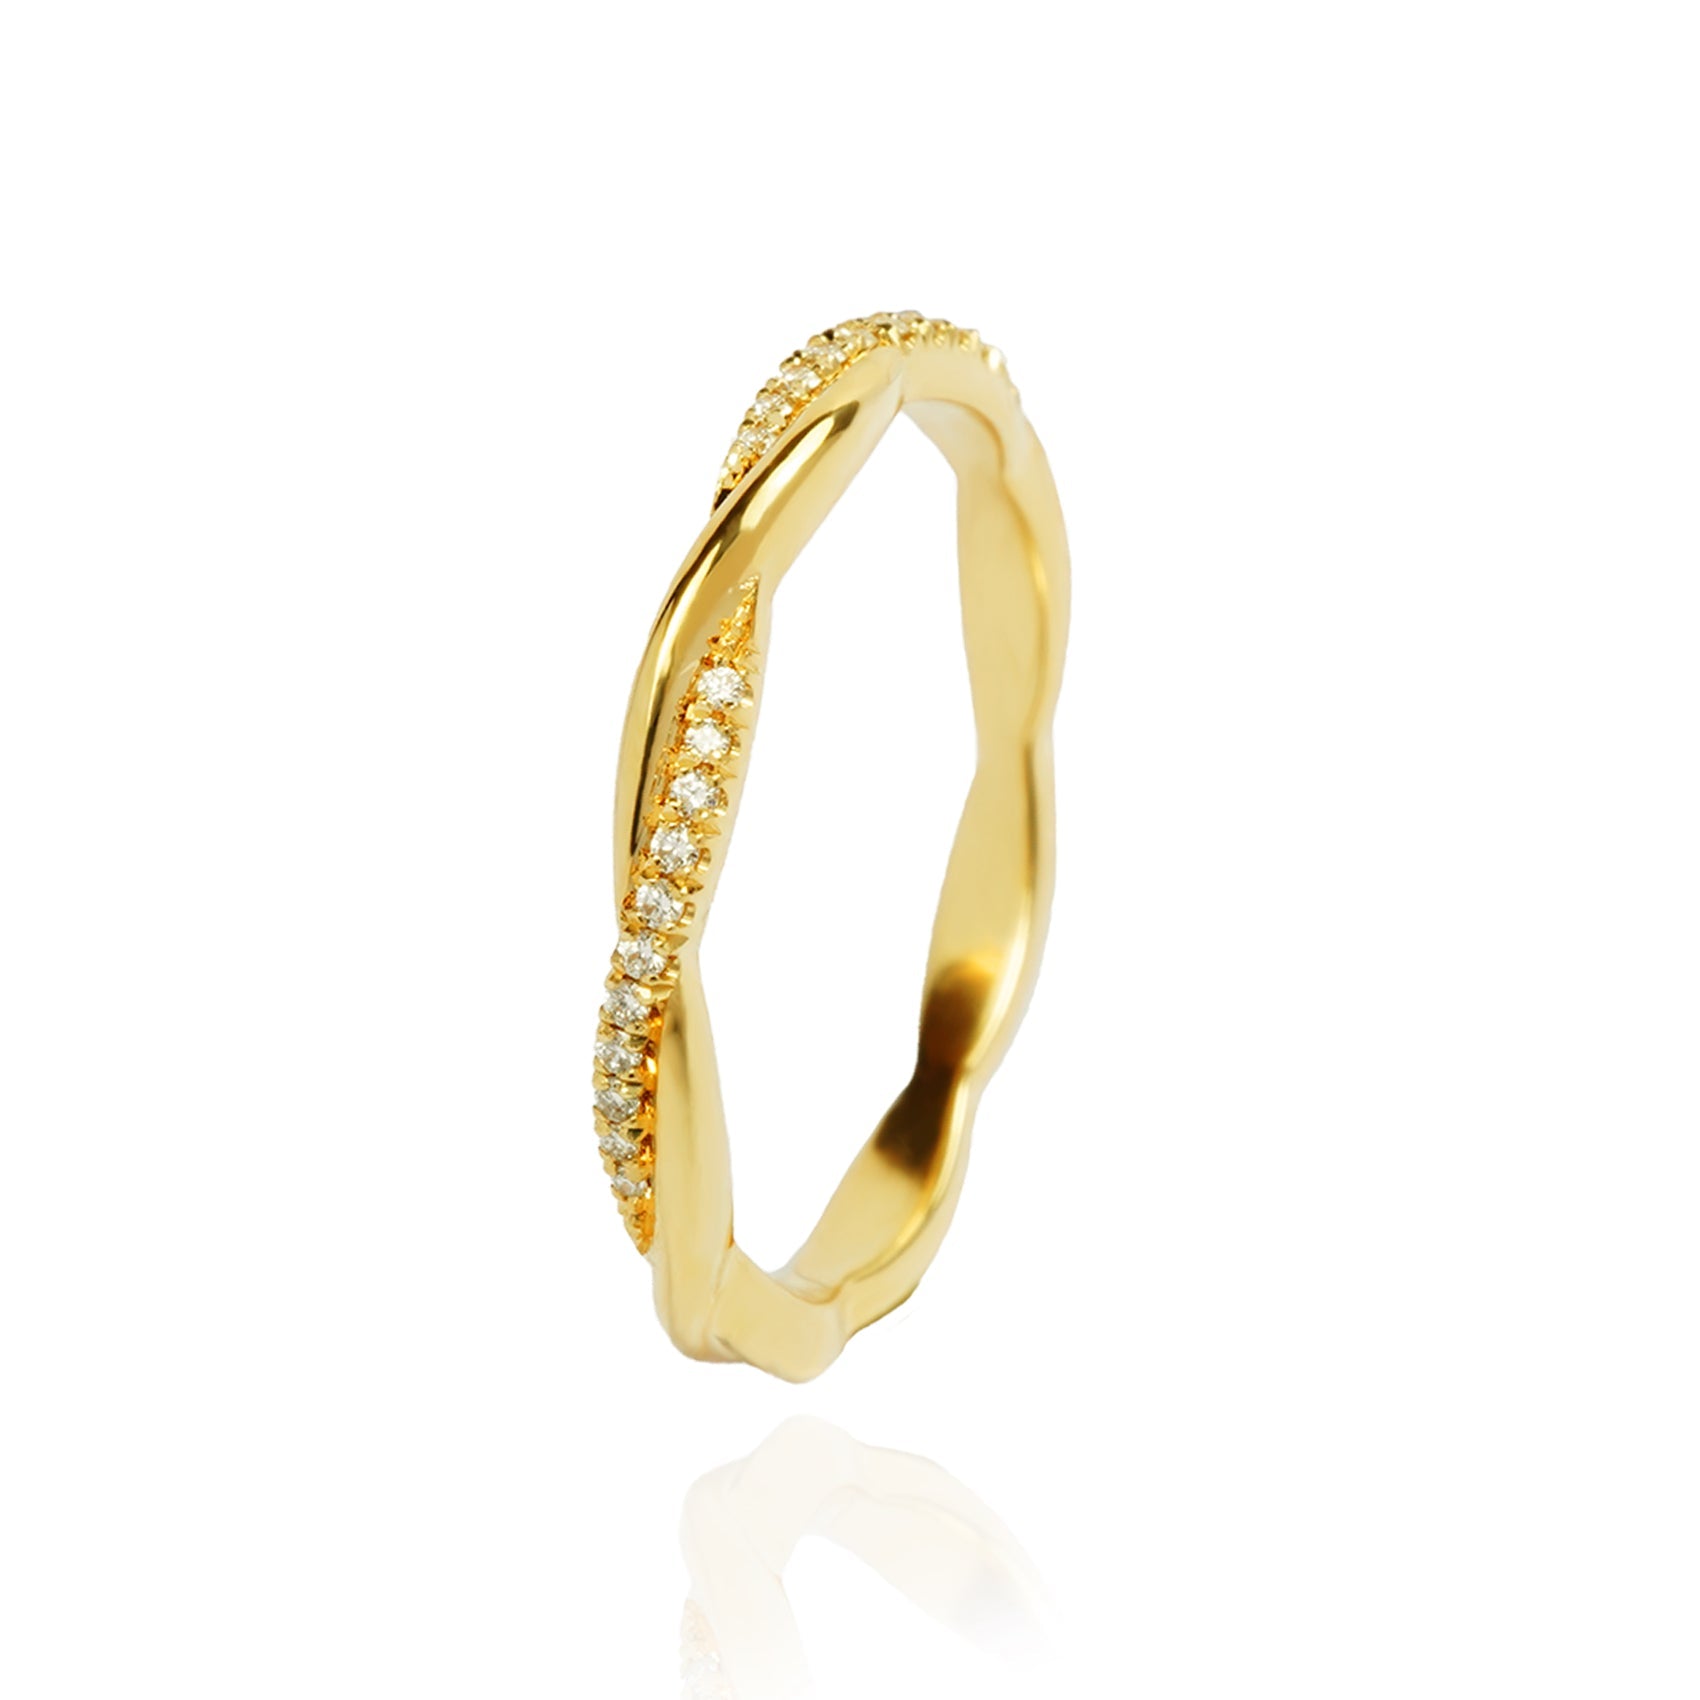 18ct Yellow Gold Entwined Ring